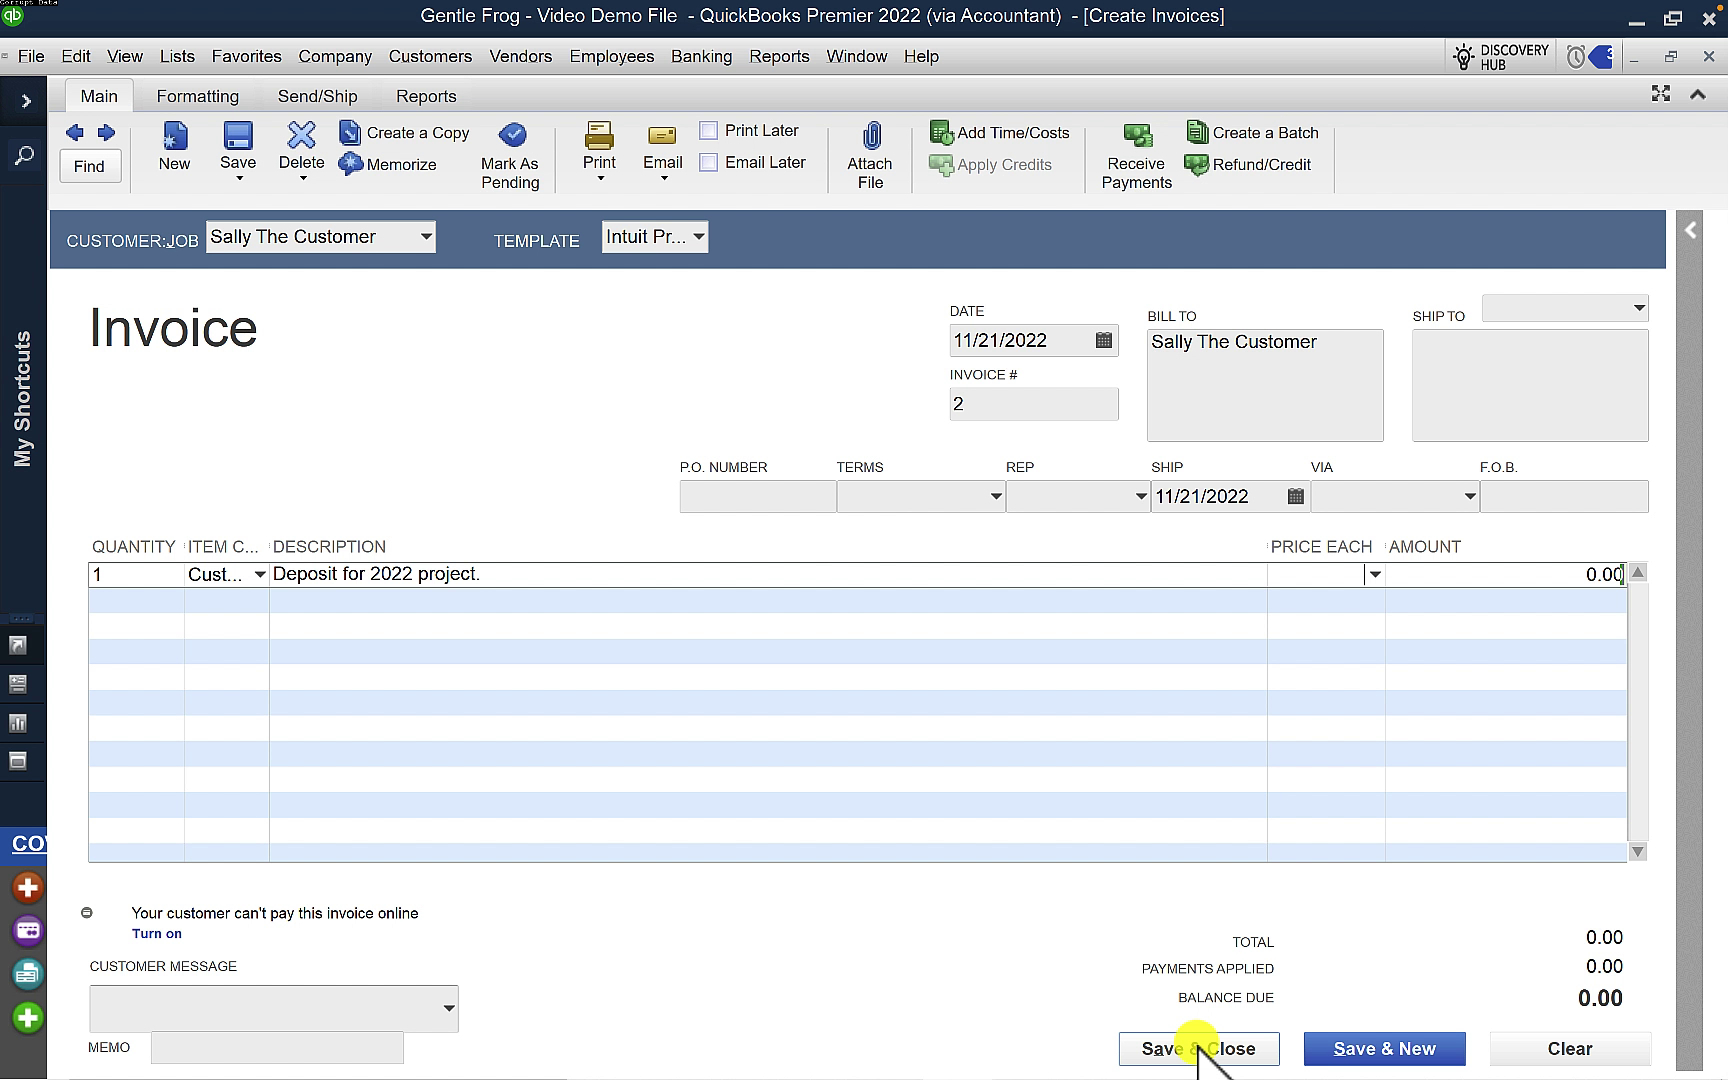 How To Add Items in QuickBooks Desktop - Gentle Frog Bookkeeping and Custom  Training